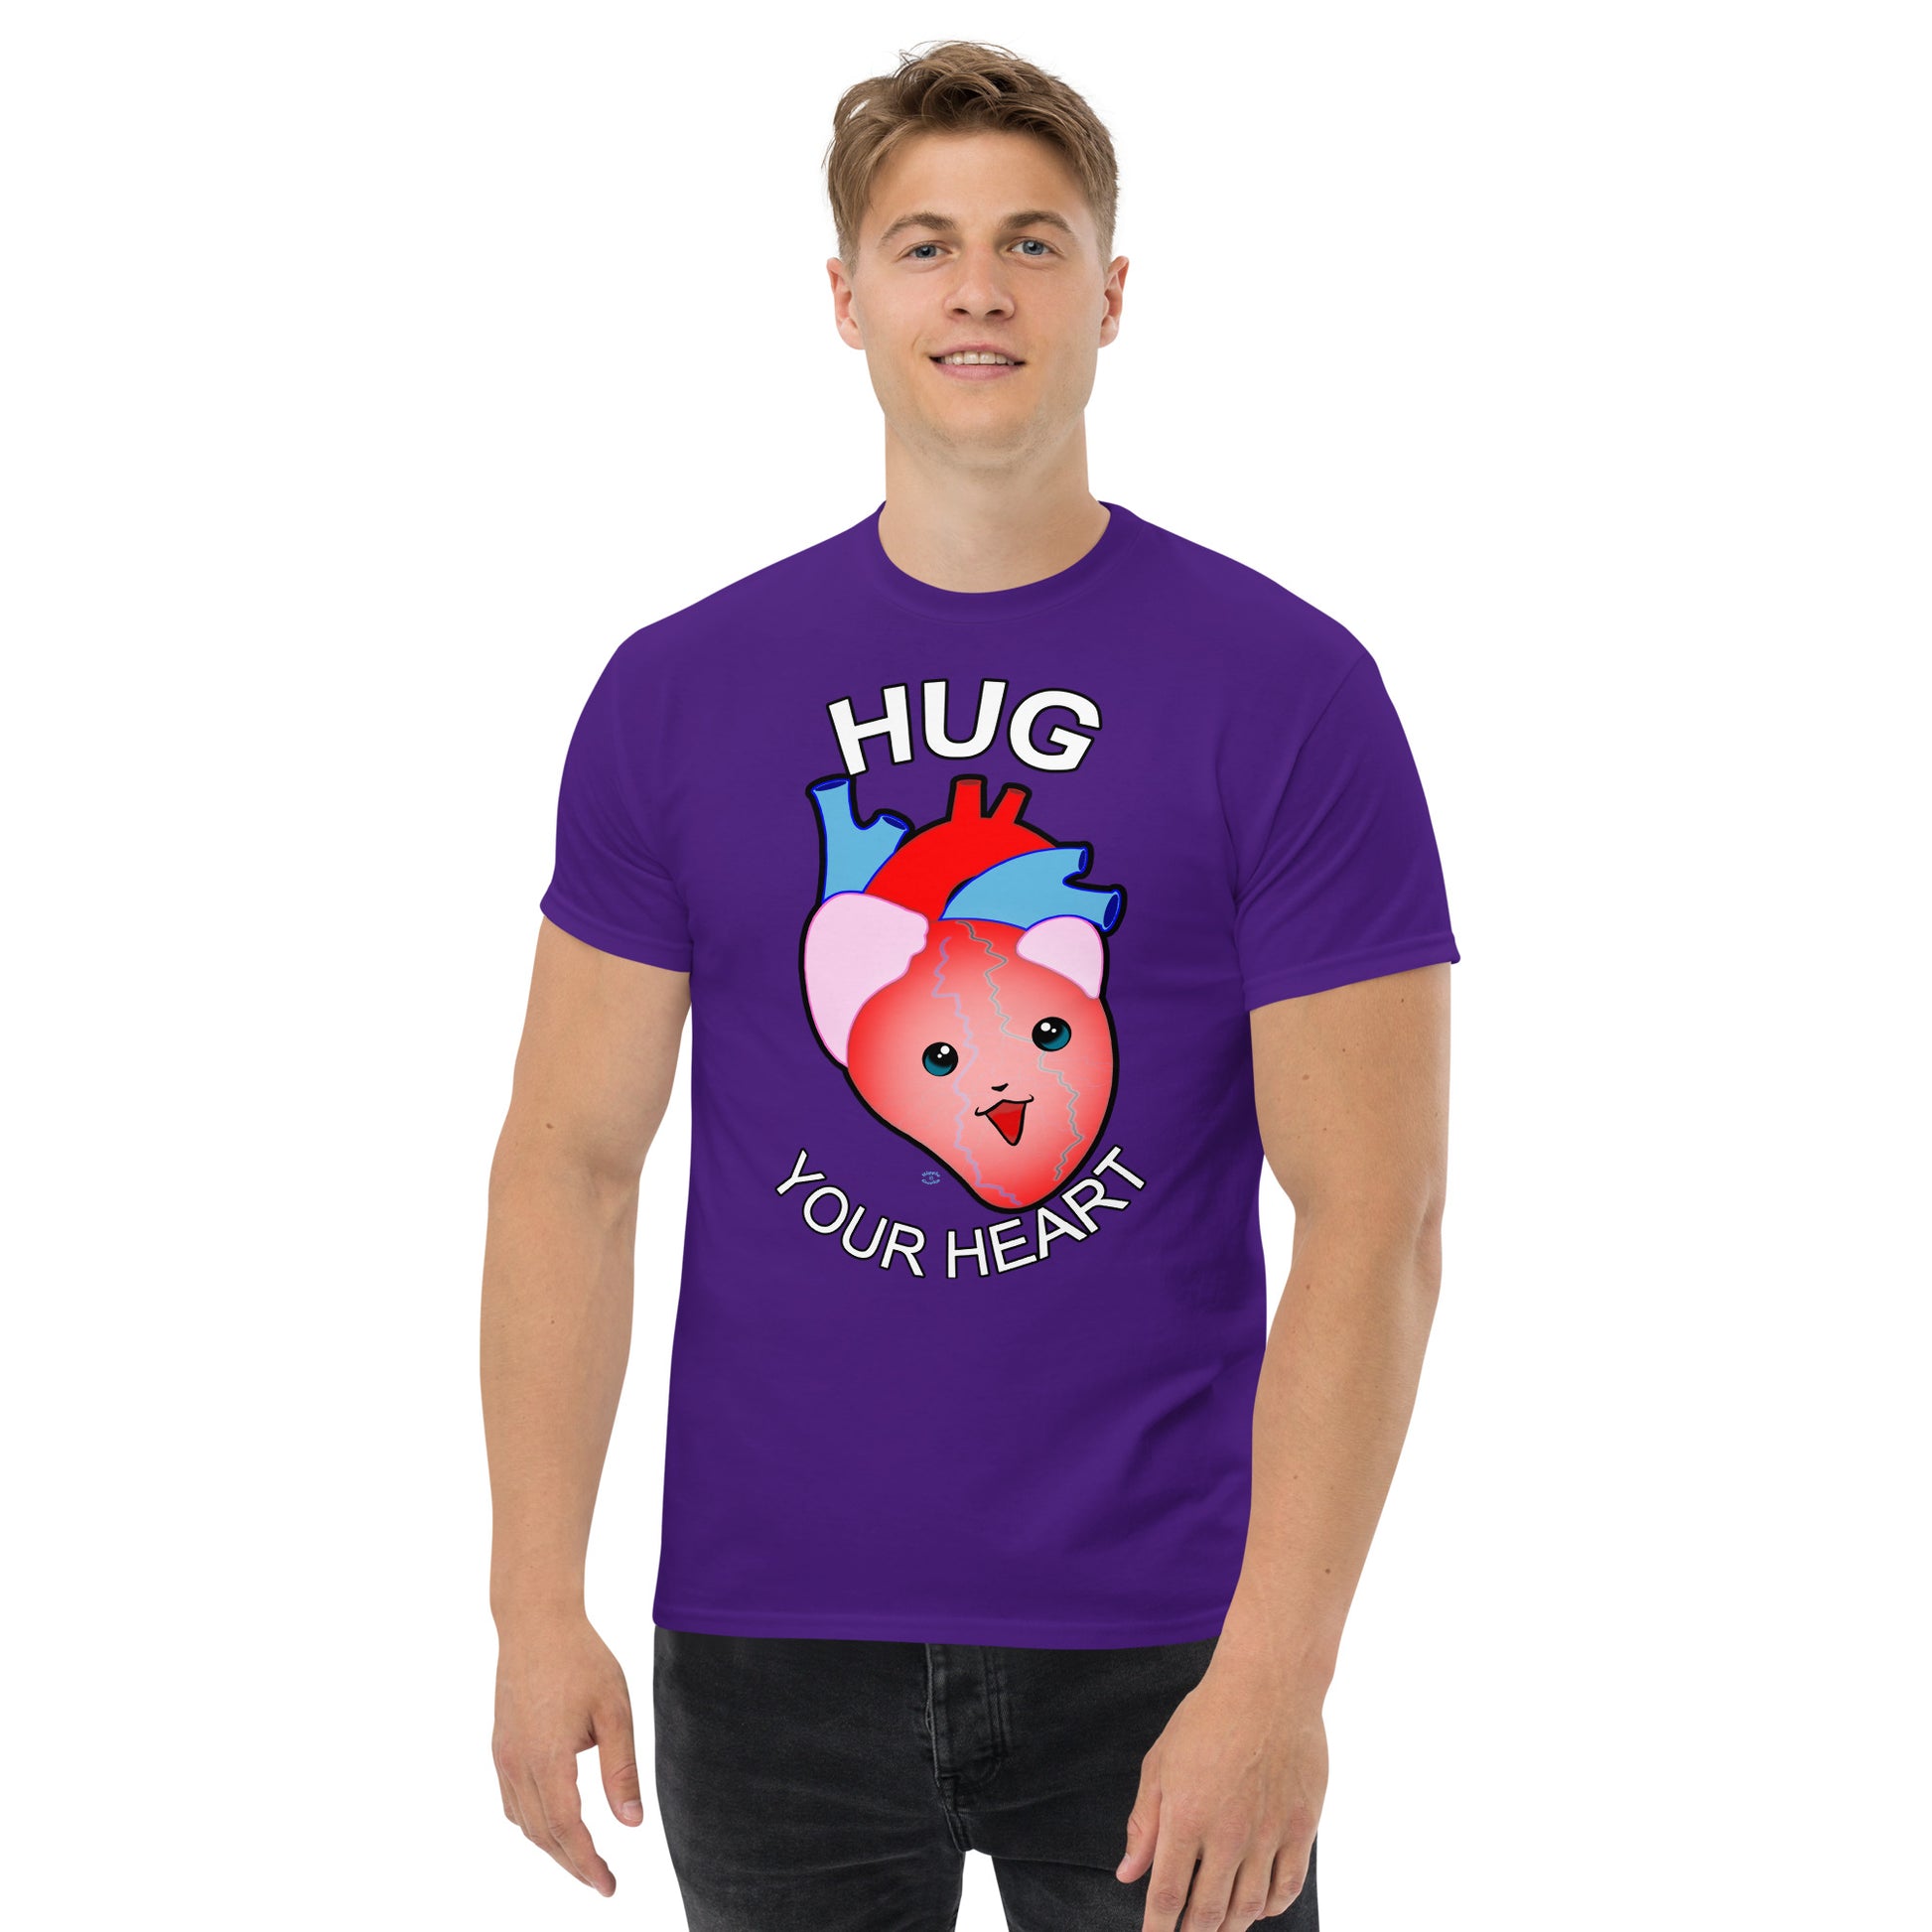 A Picture of a man wearing a short sleeved tshirt with a picture on the front of a smiling heart with the text "HUG Your Heart" - color purple